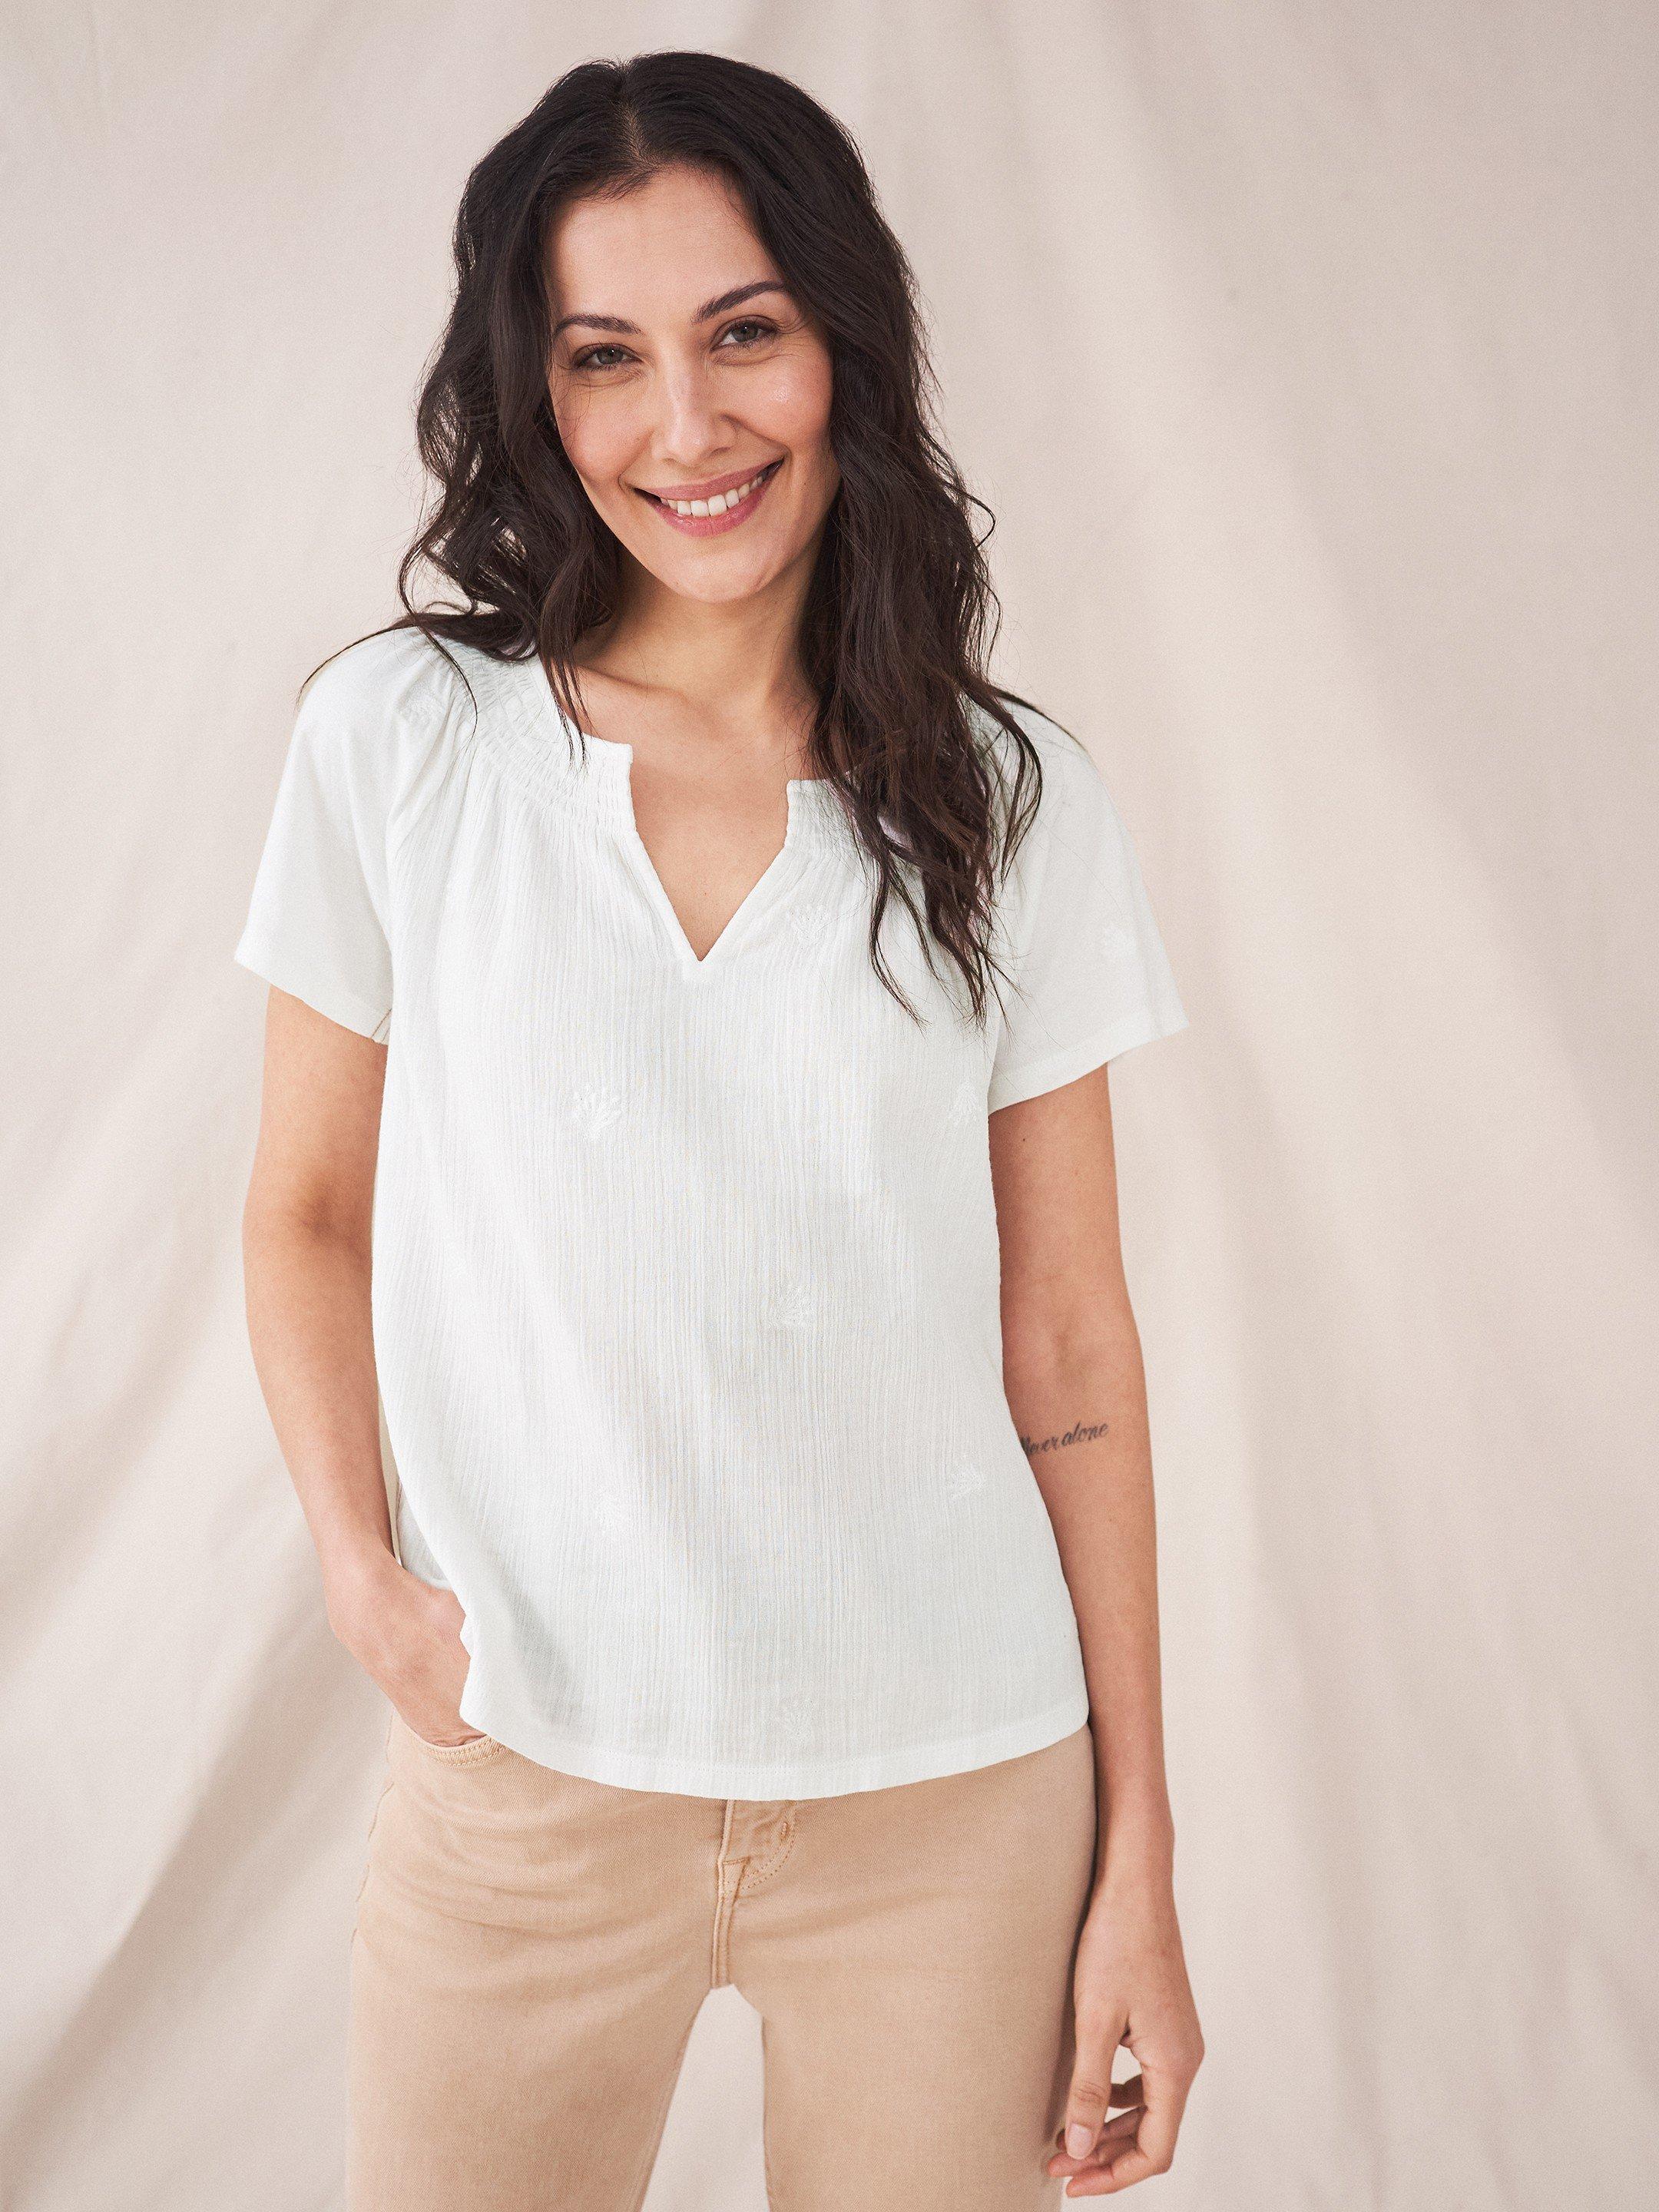 Luella Embroidered Top in NAT WHITE - MODEL FRONT